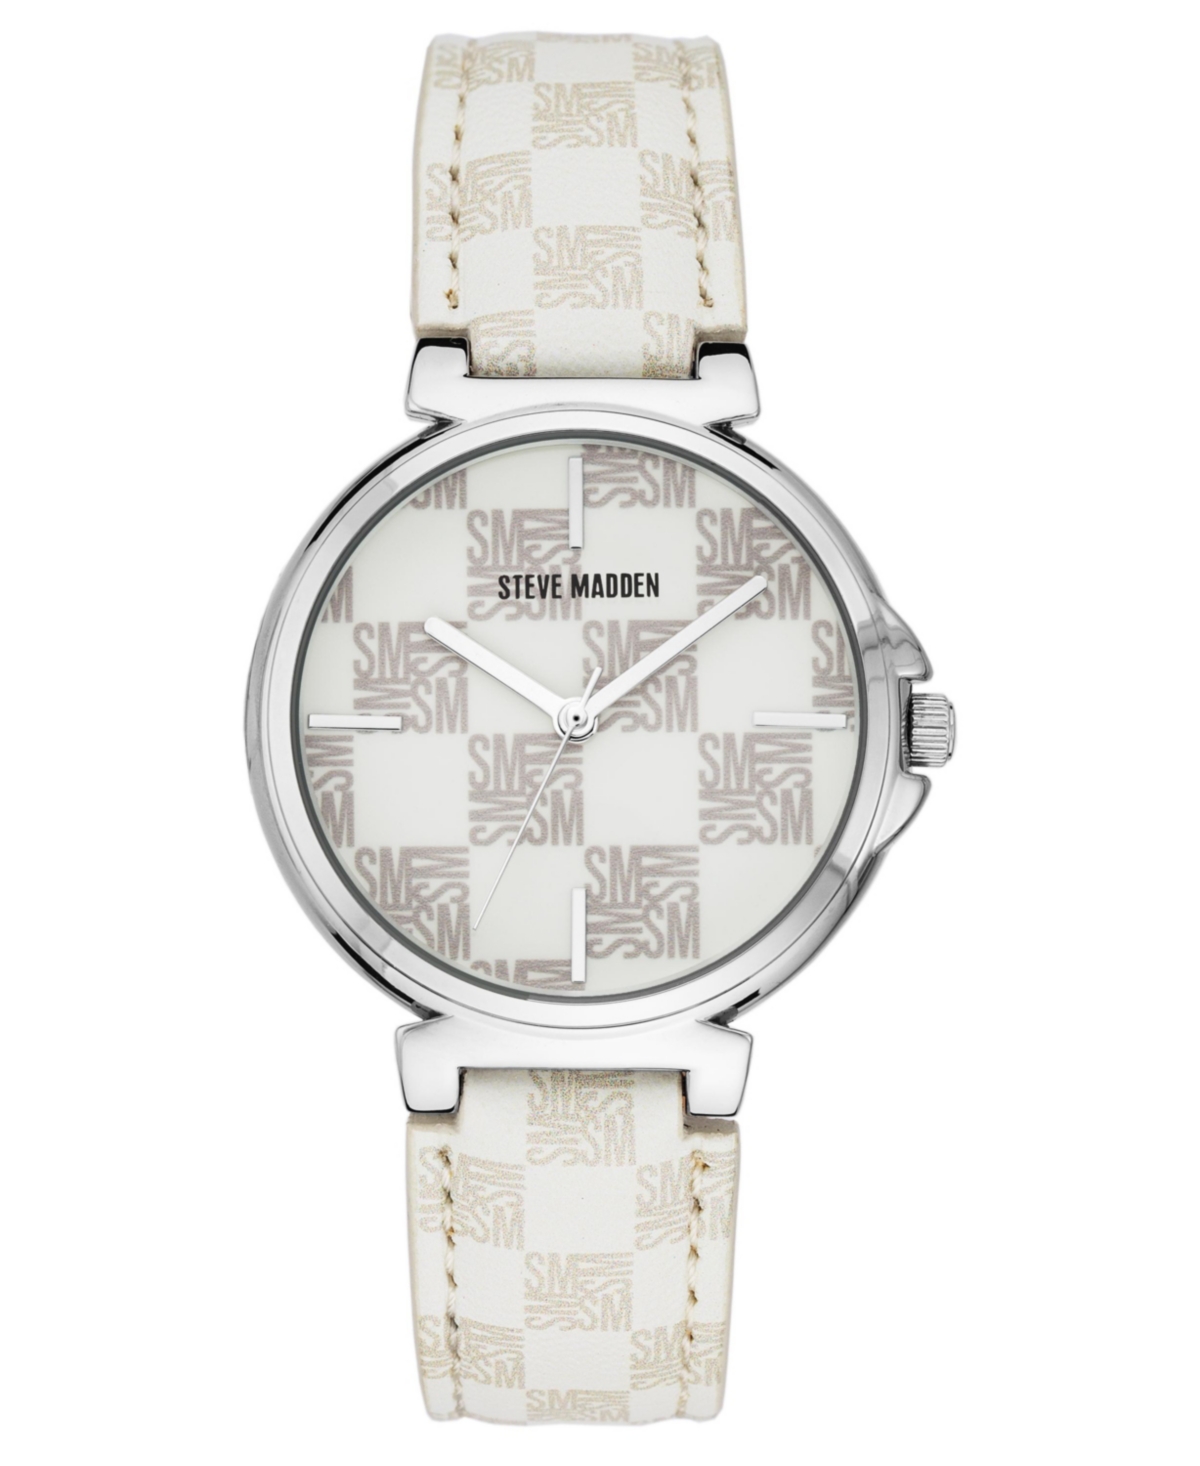 Women's Dual Colored White and Cream Polyurethane Leather Strap with Steve Madden Logo in Checkered Pattern and Stitching Watch, 36mm - W